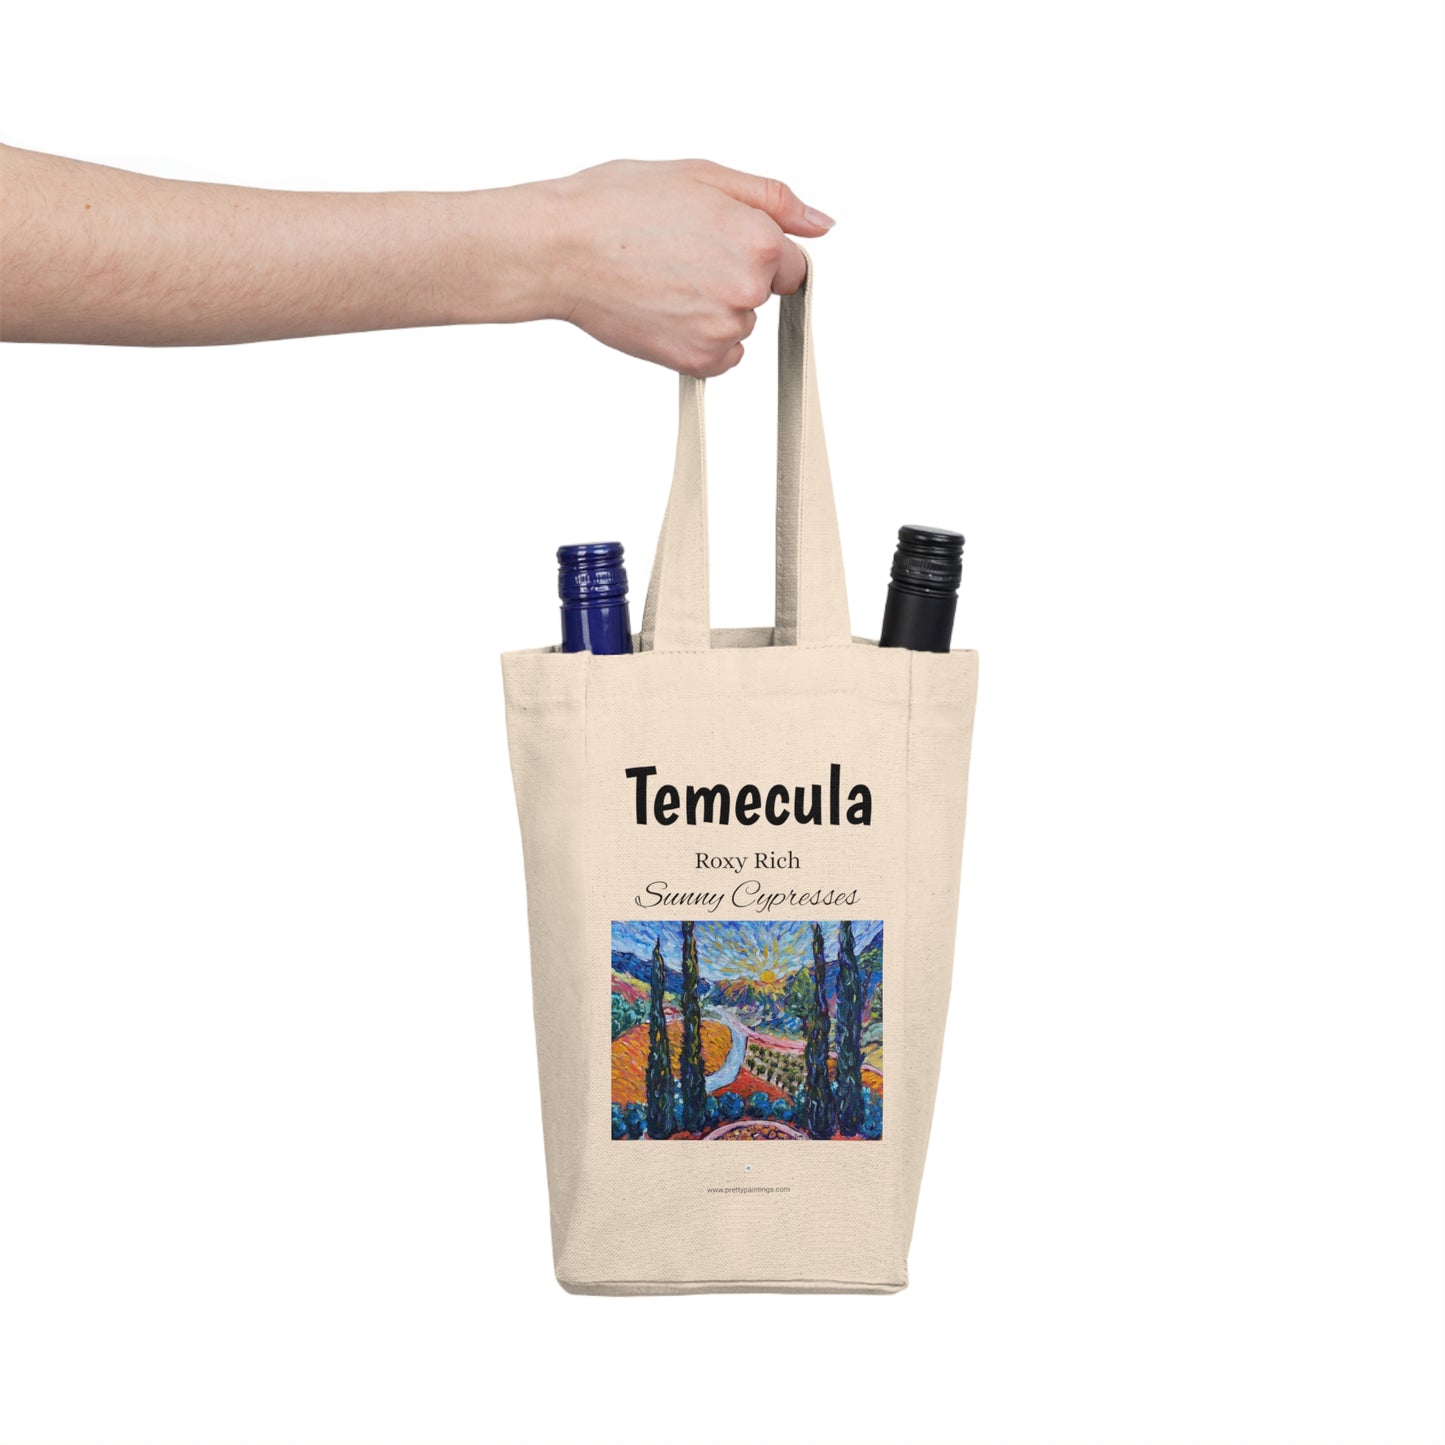 Temecula Double Wine Tote Bag featuring "Sunny Cypresses" painting